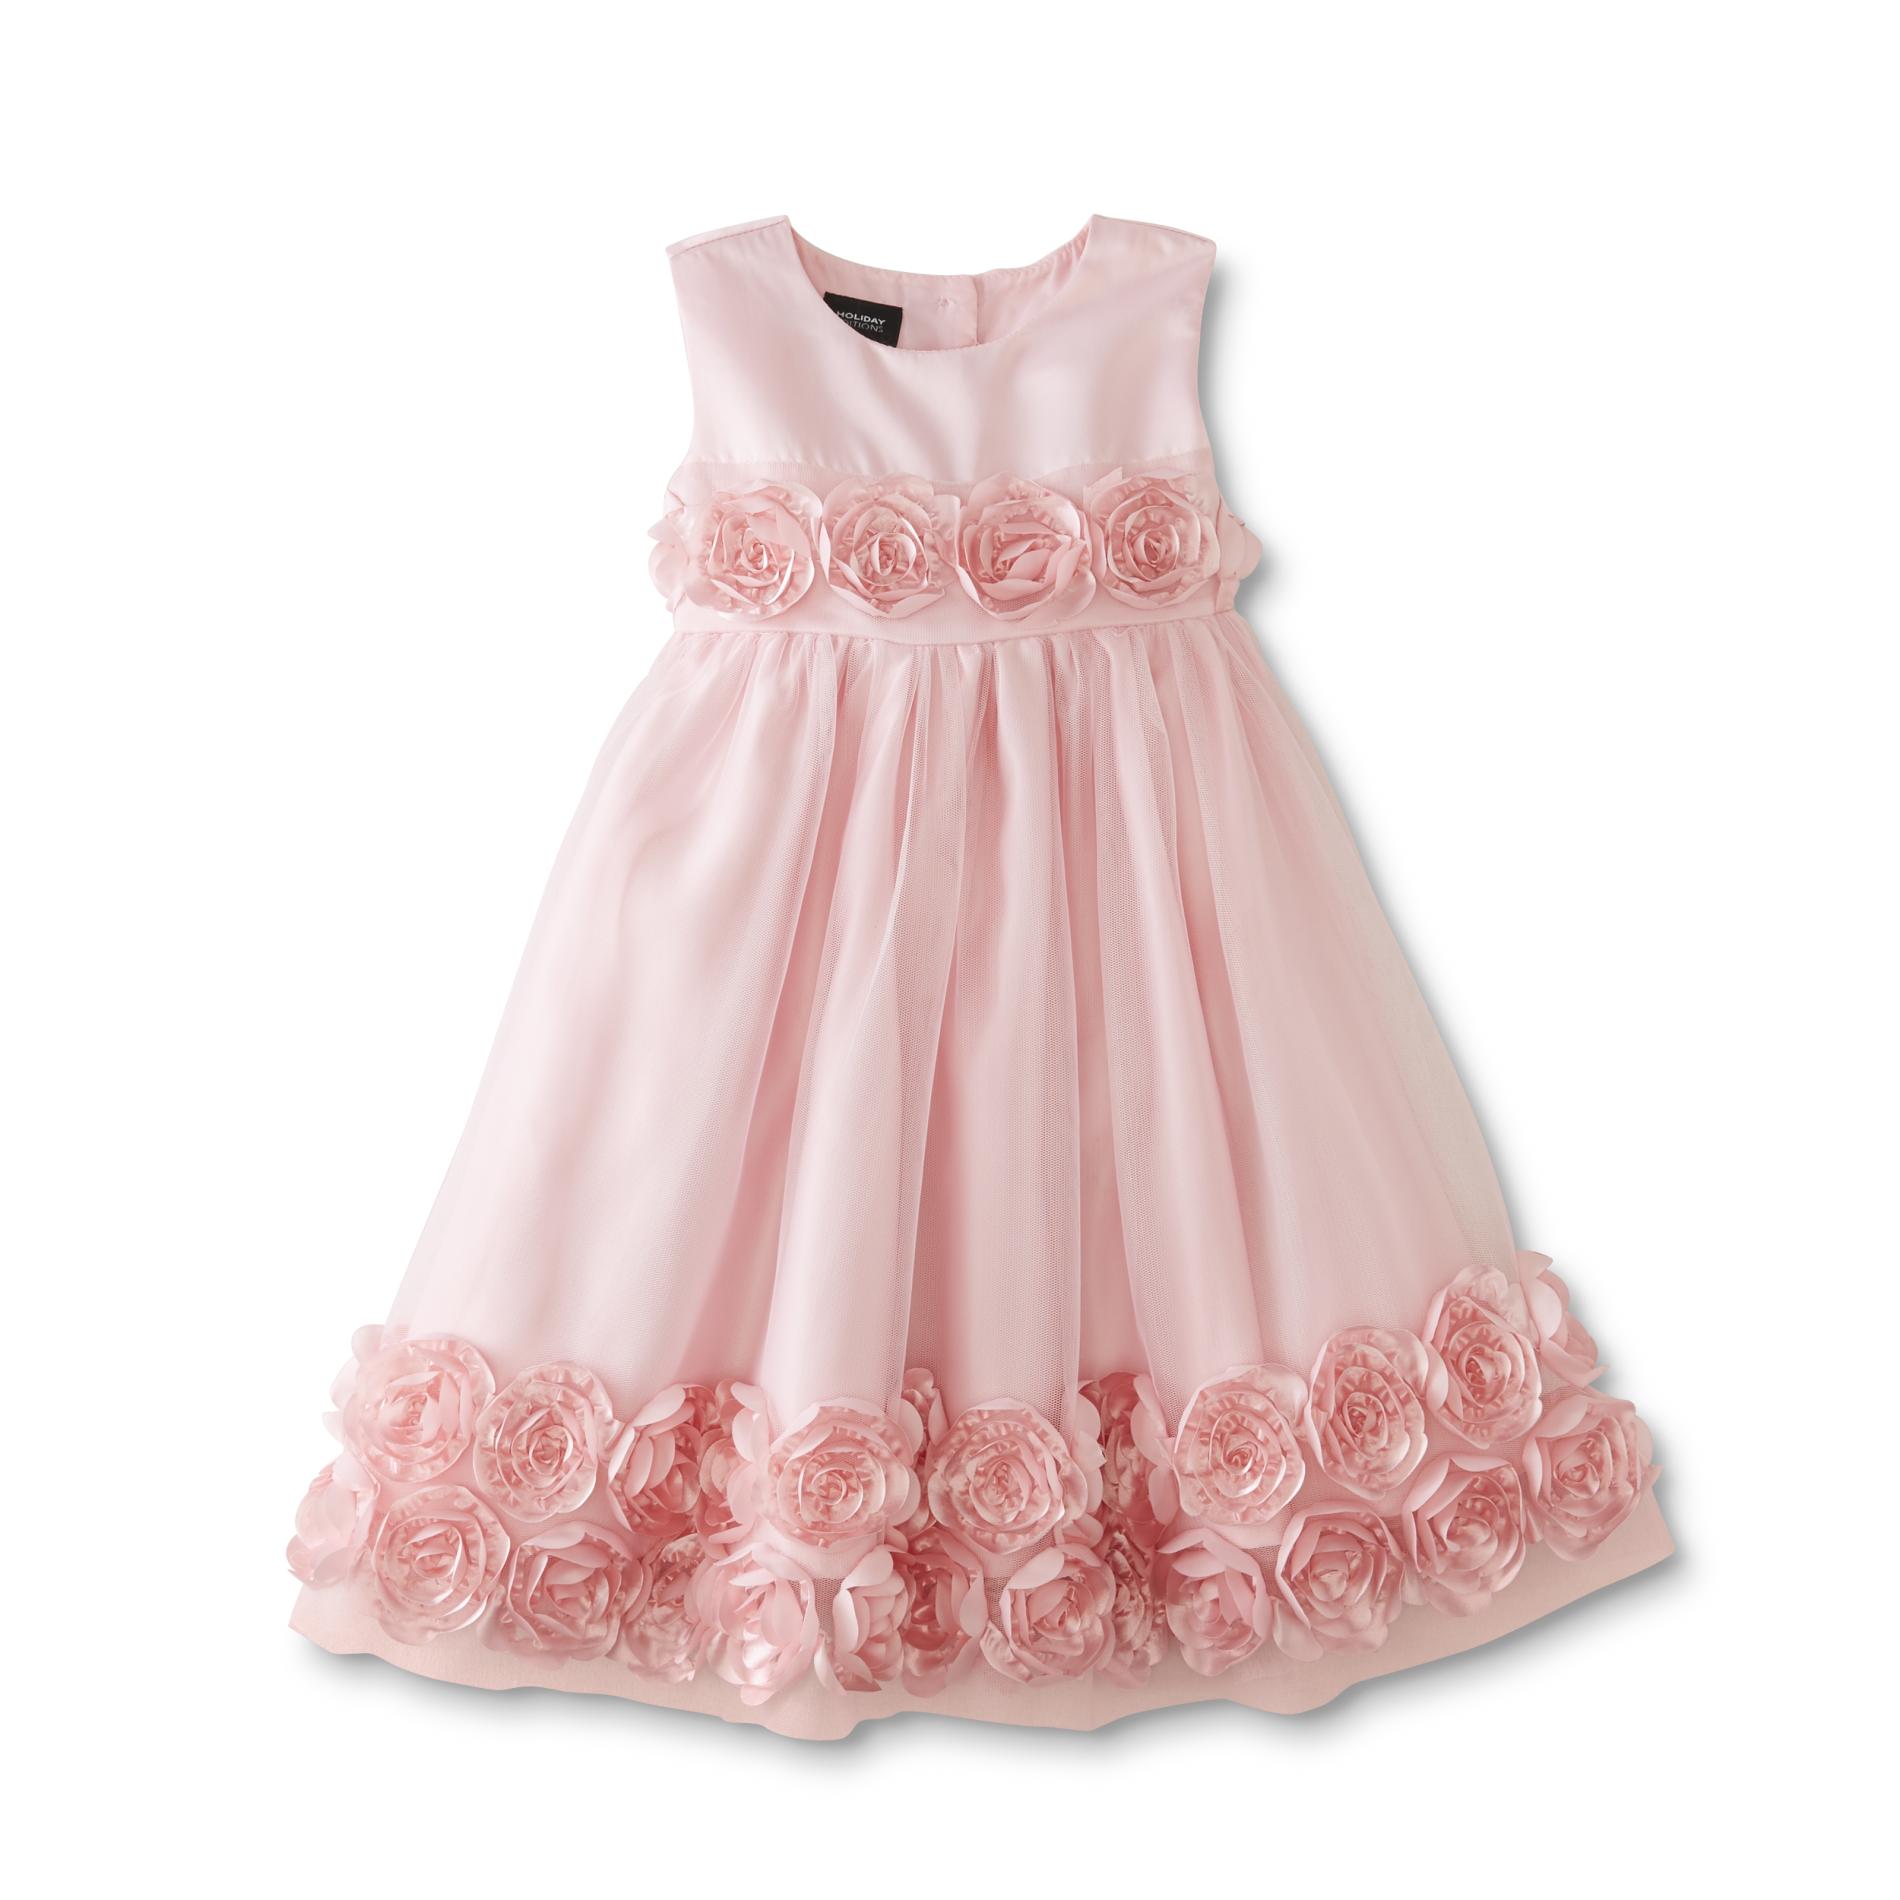 Holiday Editions Infant & Toddler Girls' Sleeveless Party Dress - Kmart